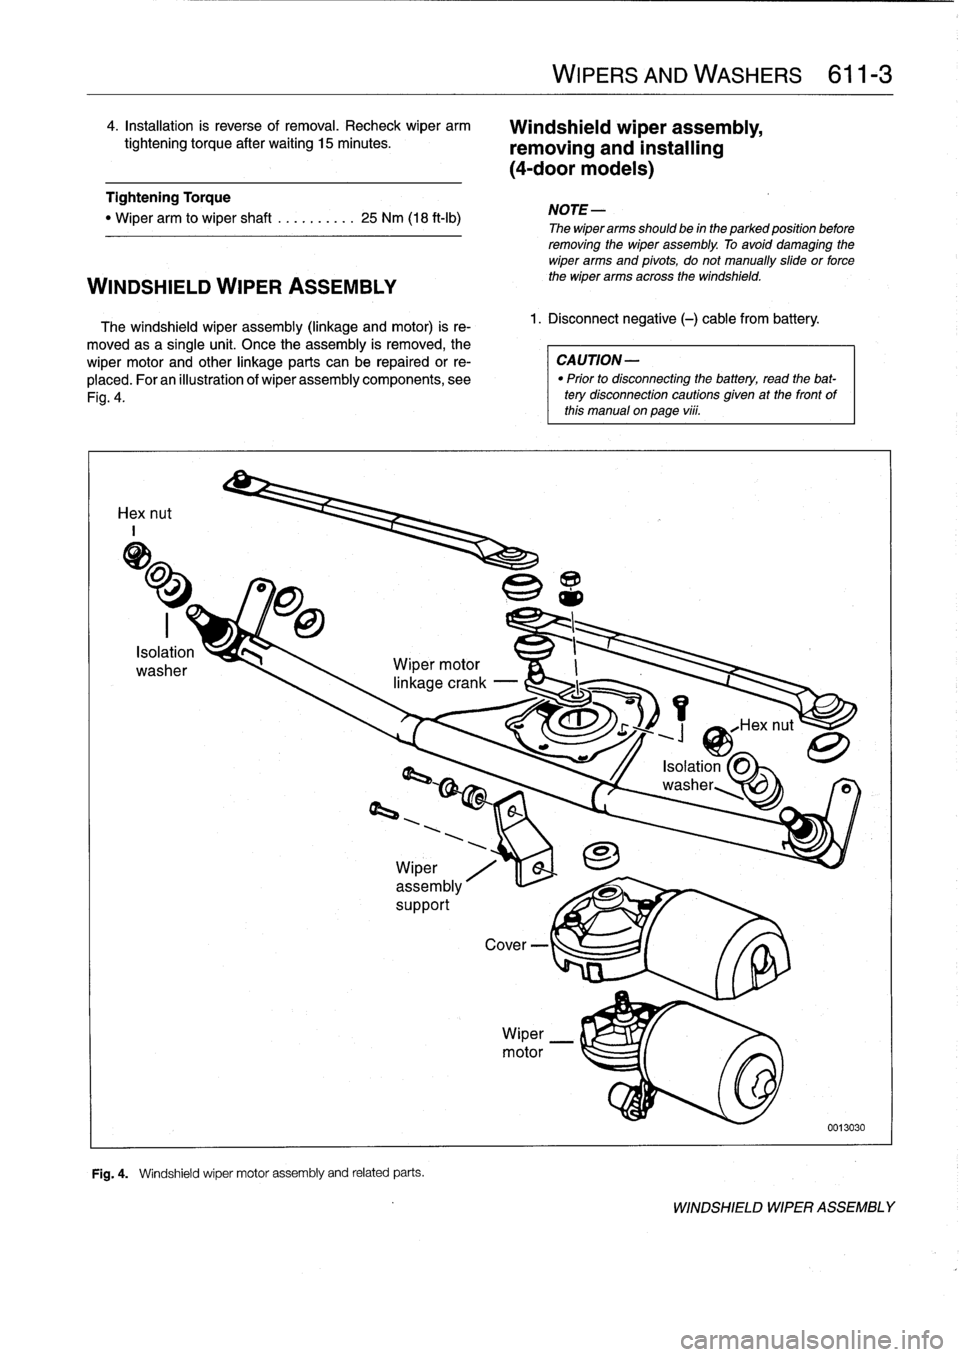 BMW 318i 1998 E36 Workshop Manual 
4
.
Installation
is
reverse
of
removal
.
Recheck
wiper
arm

tightening
torque
after
waiting
15minutes
.

Tightening
Torque

"
Wiper
arm
to
wiper
shaft
..........
25
Nm
(18
ft-Ib)

WINDSHIELD
WIPER
AS